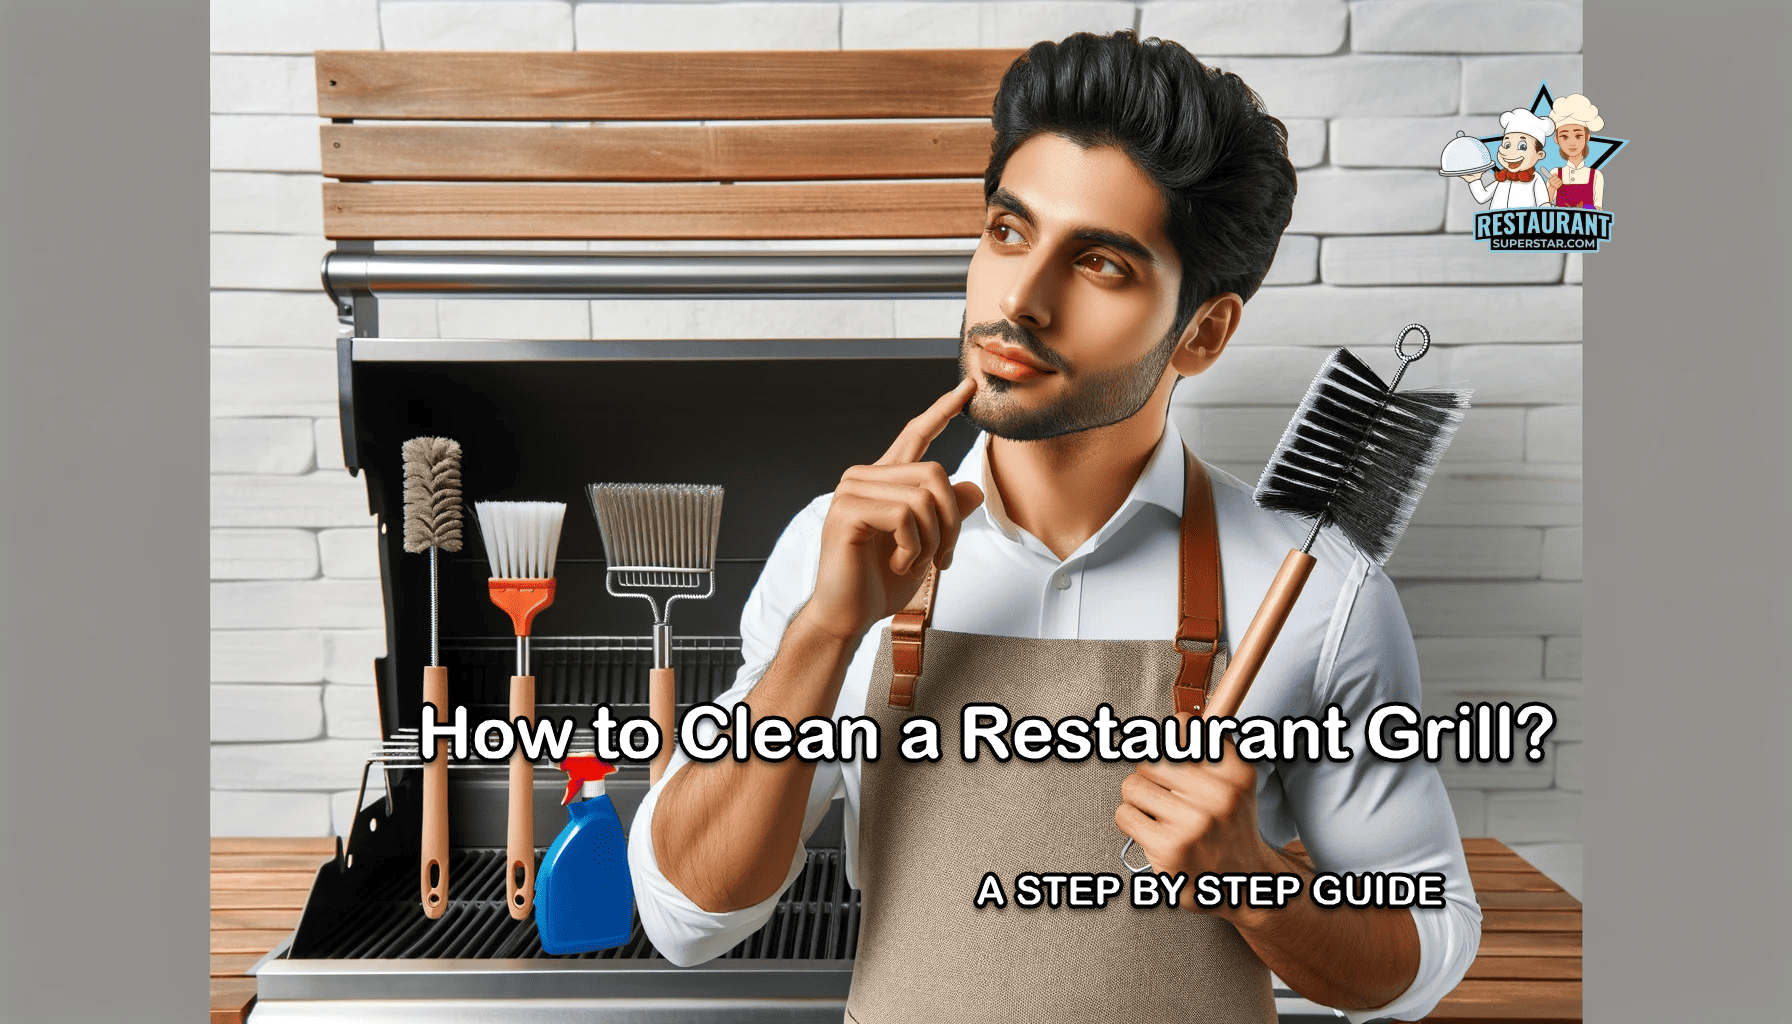 How to Clean a Restaurant Grill: A Step-by-Step Guide